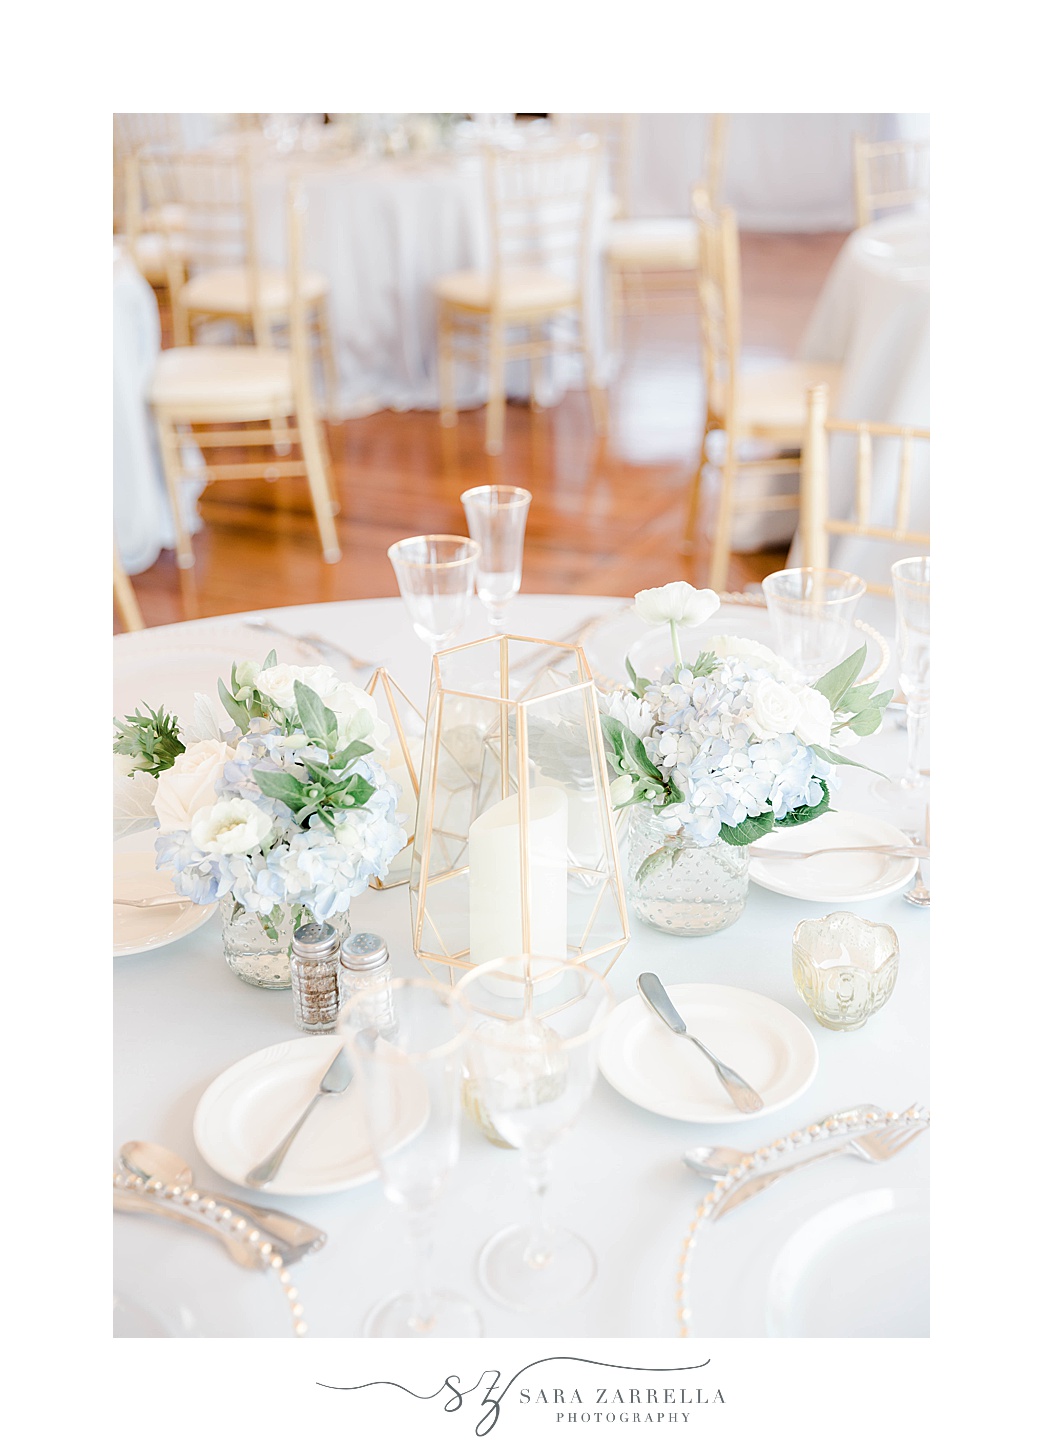 centerpieces with white flowers at Regatta Place wedding reception 